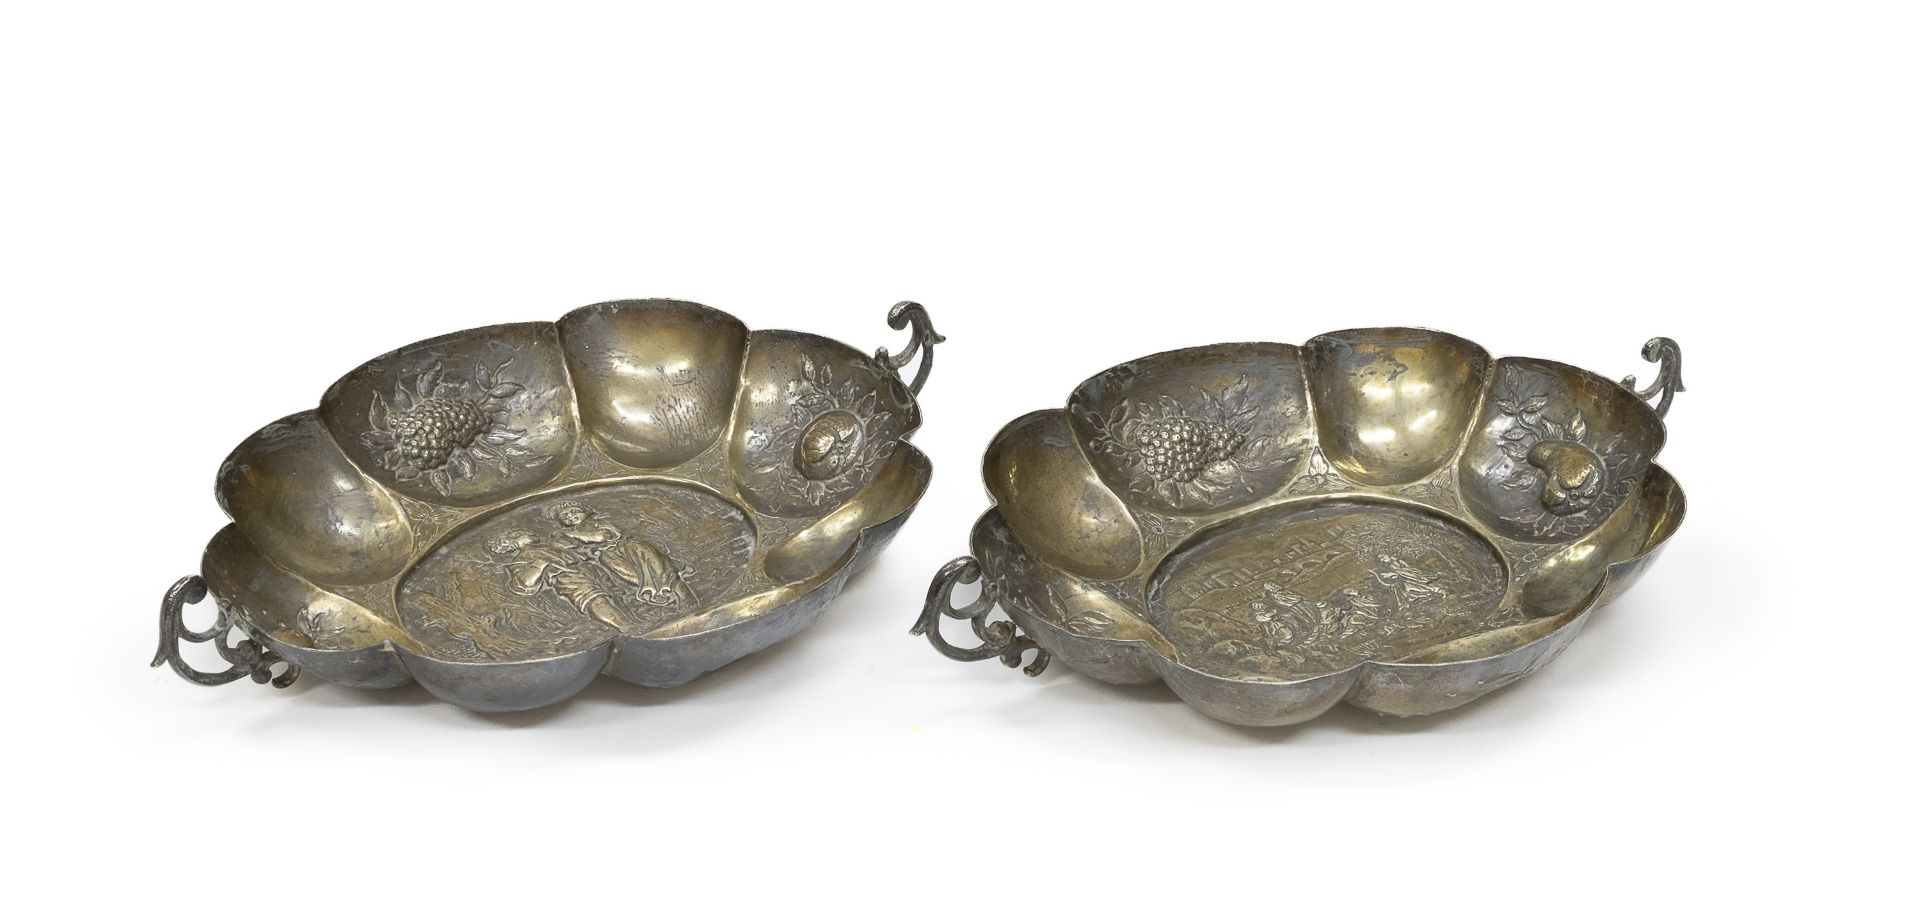 PAIR OF SILVER TRAYS GERMANY EARLY 19TH CENTURY